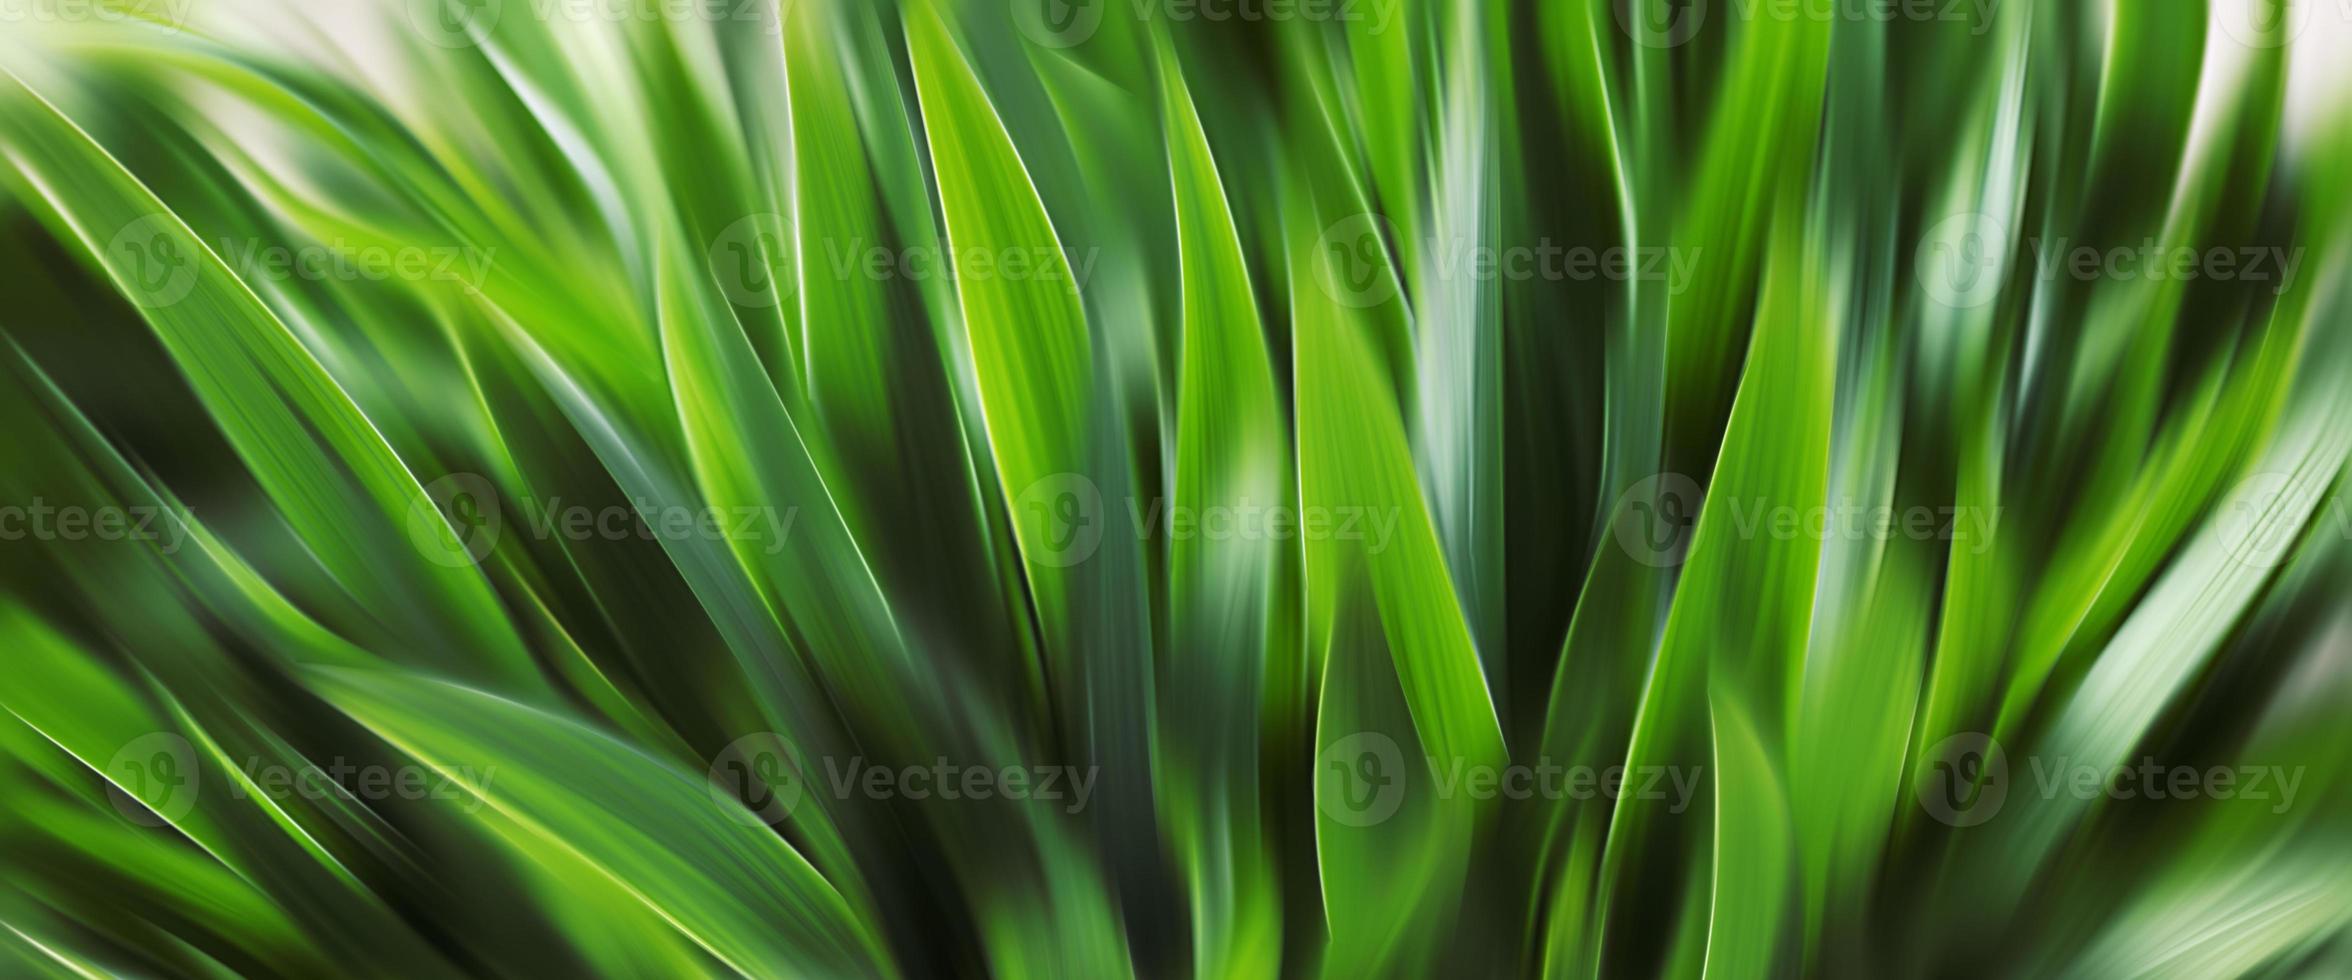 Abstract blurred green grass. photo